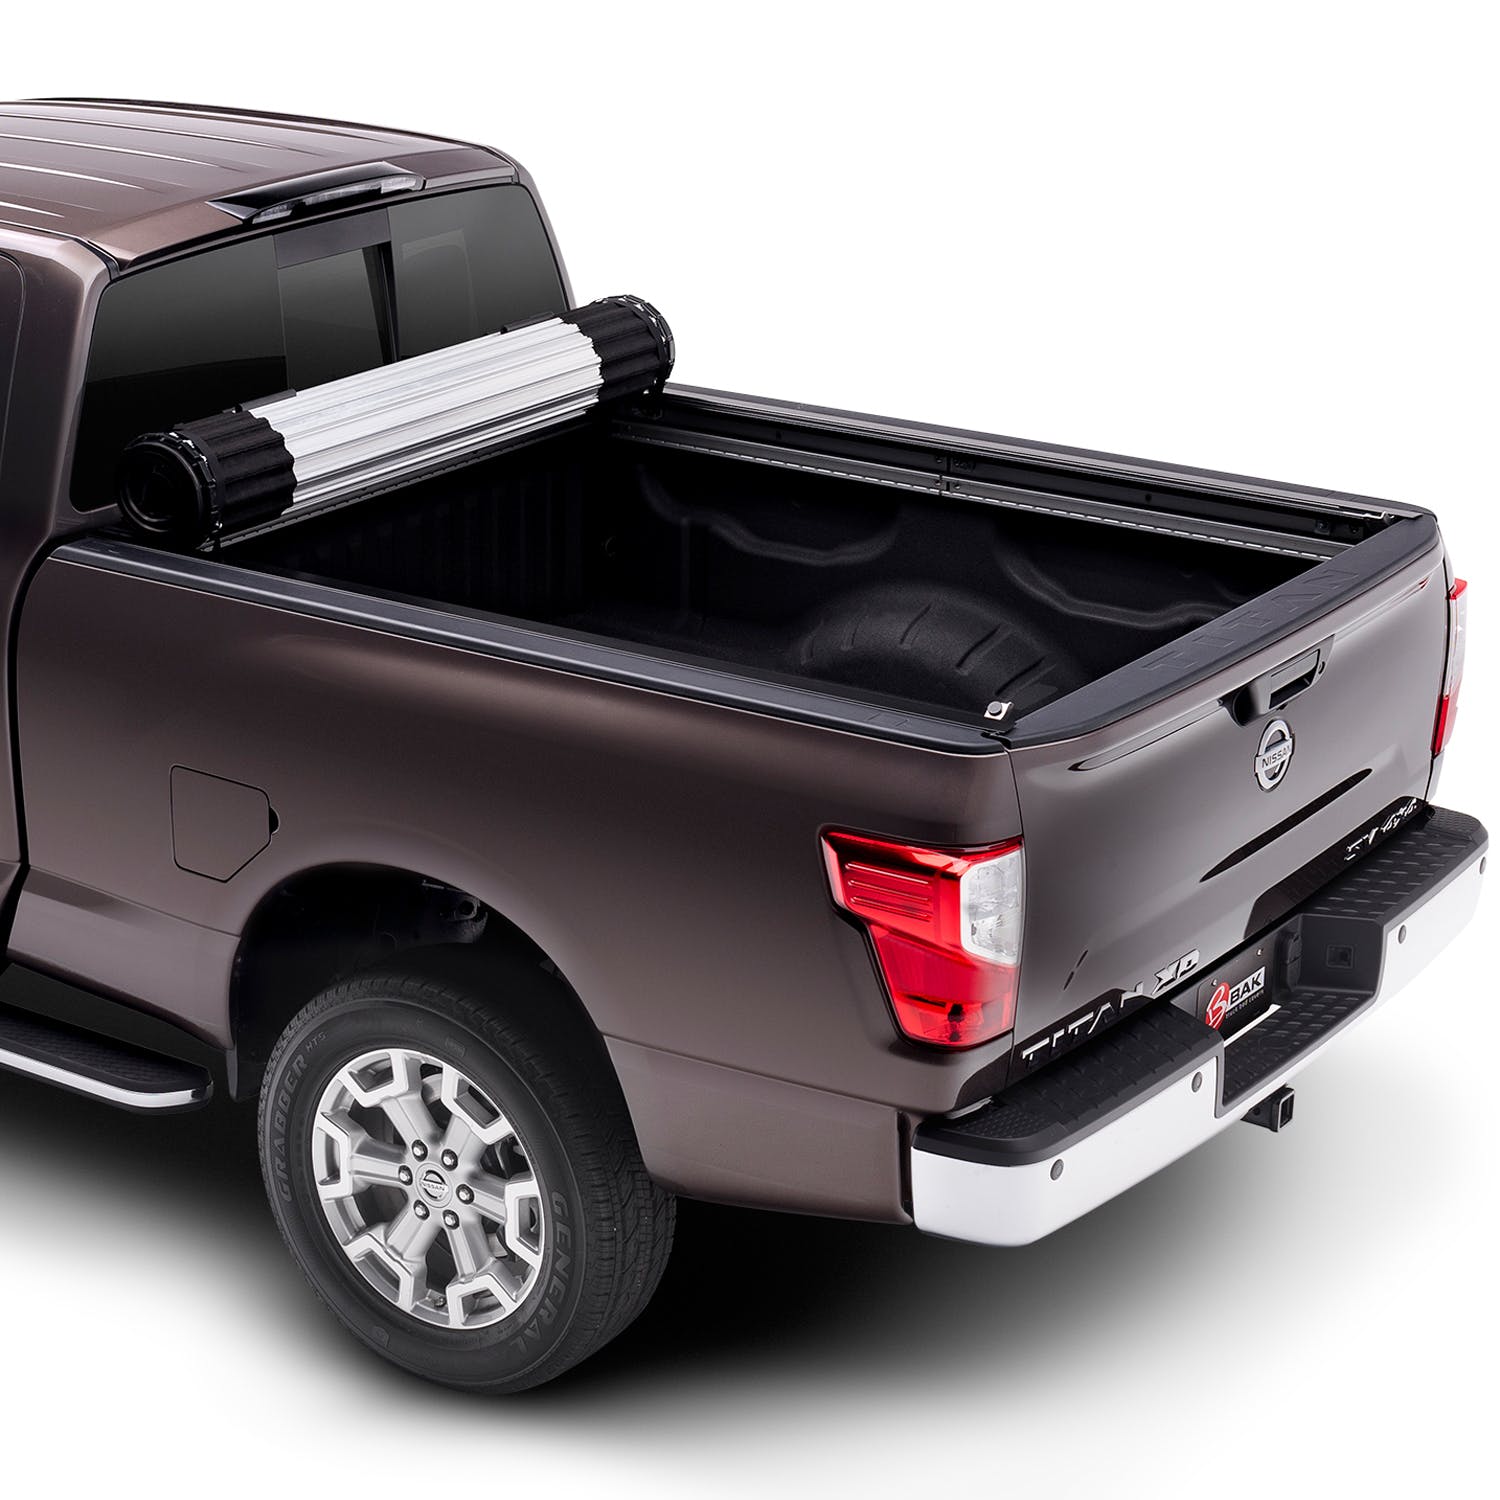 BAK Industries 39524 Revolver X2 Hard Rolling Truck Bed Cover